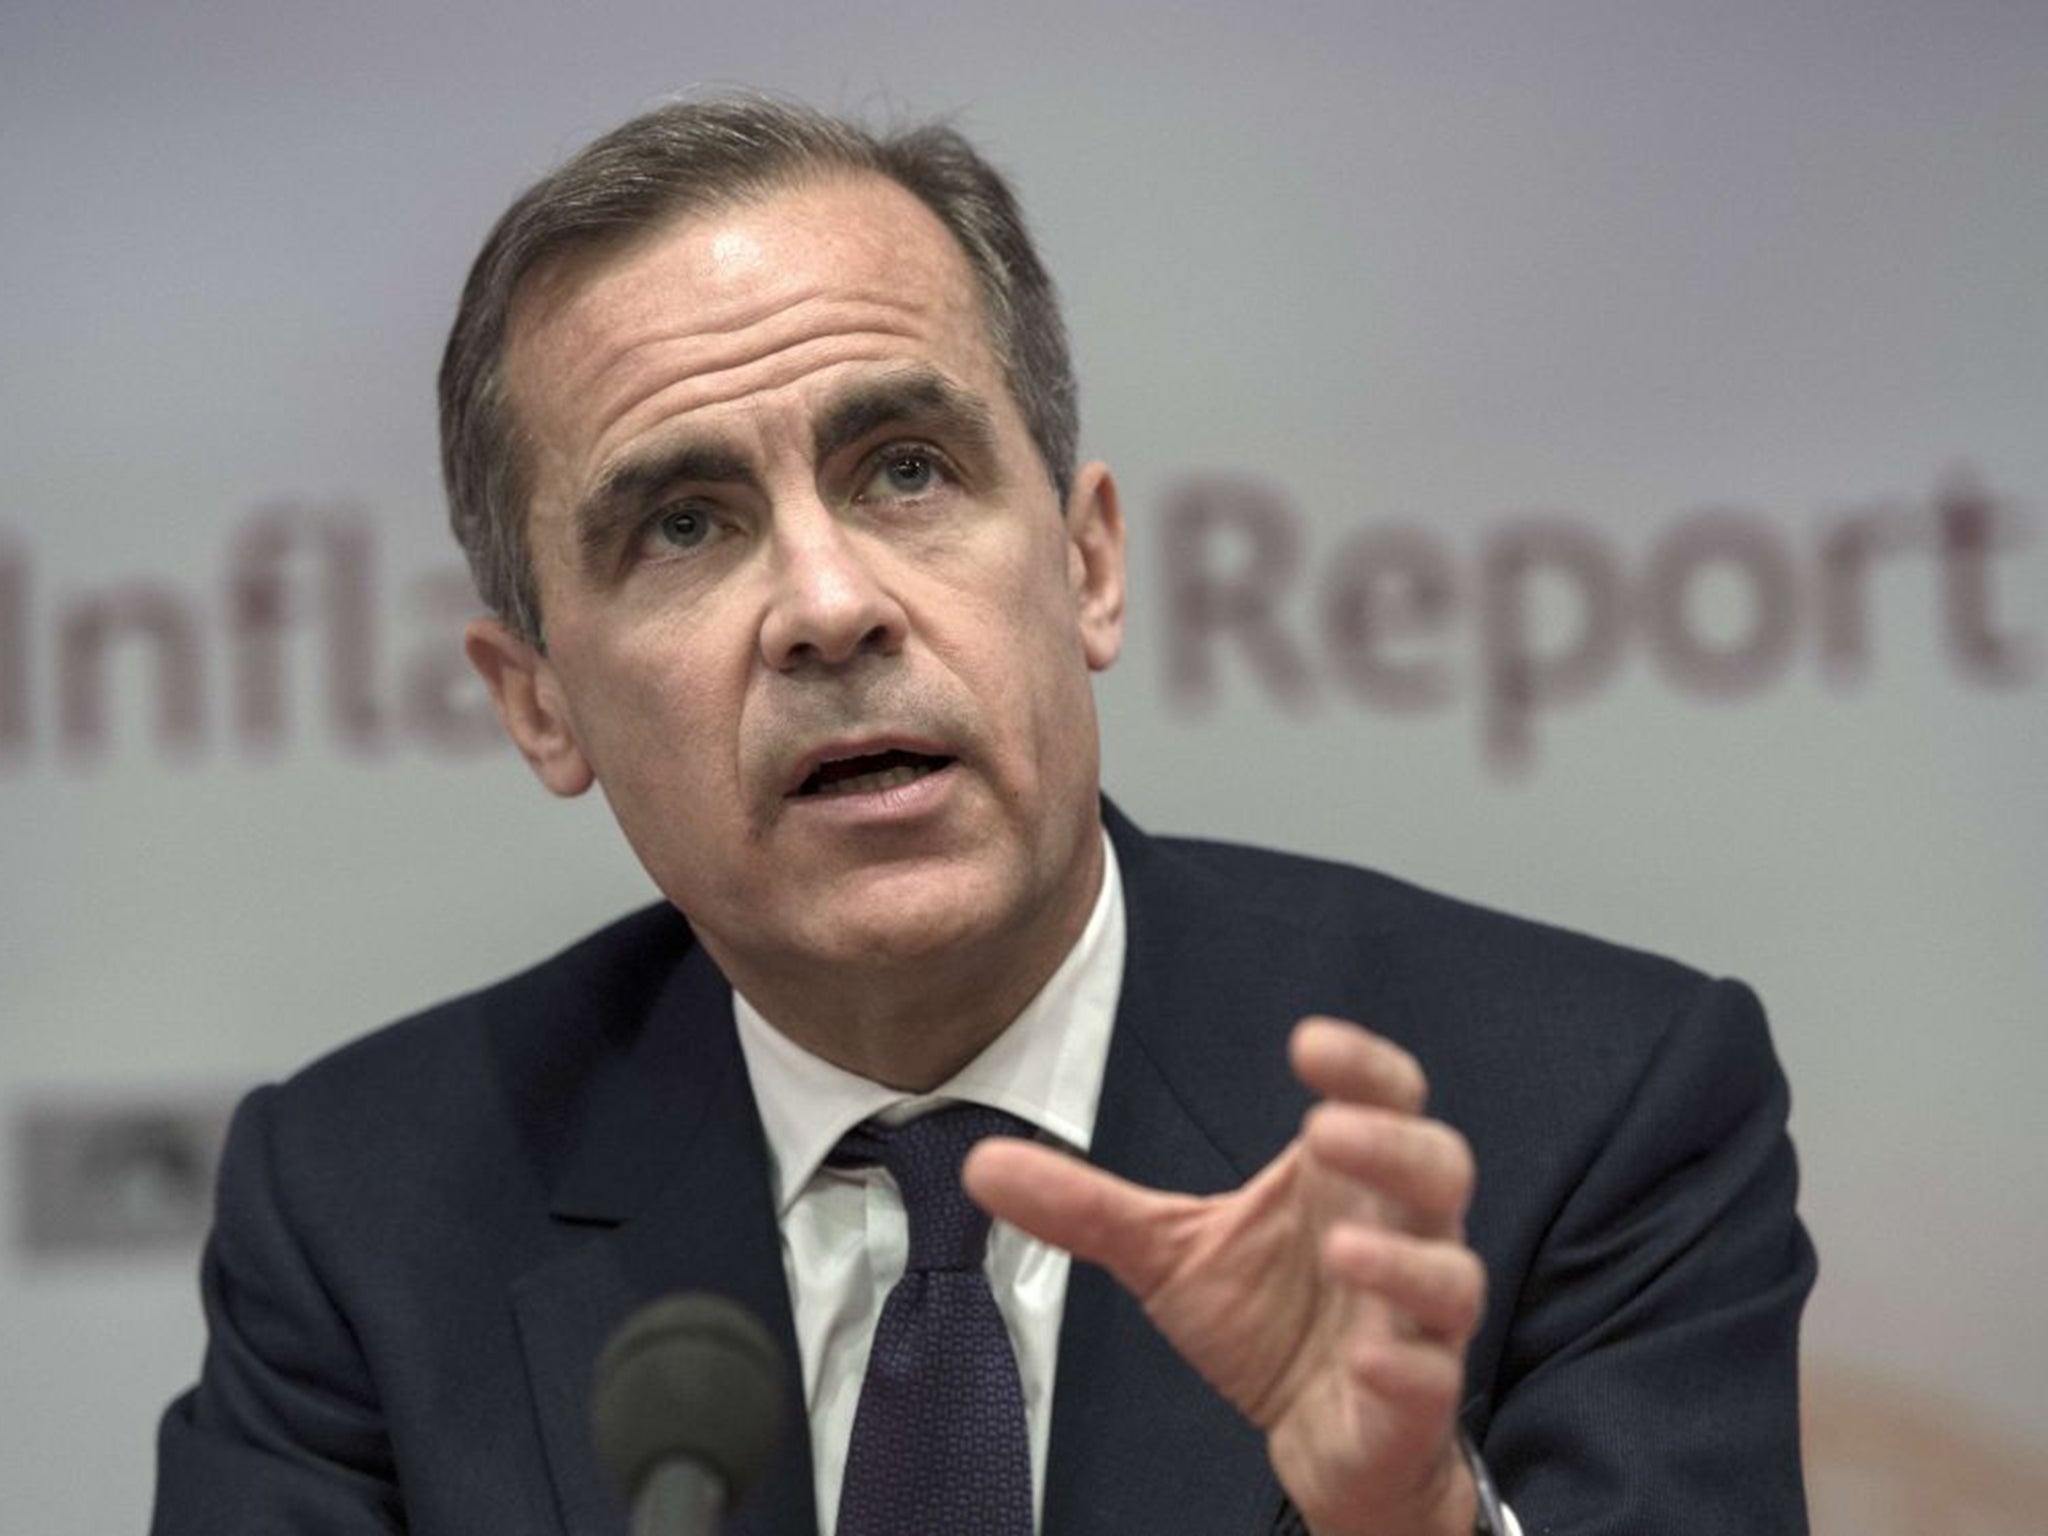 Dramatic volatility in global bond markets should not be a cause for alarm, according to the Bank of England Governor Mark Carney